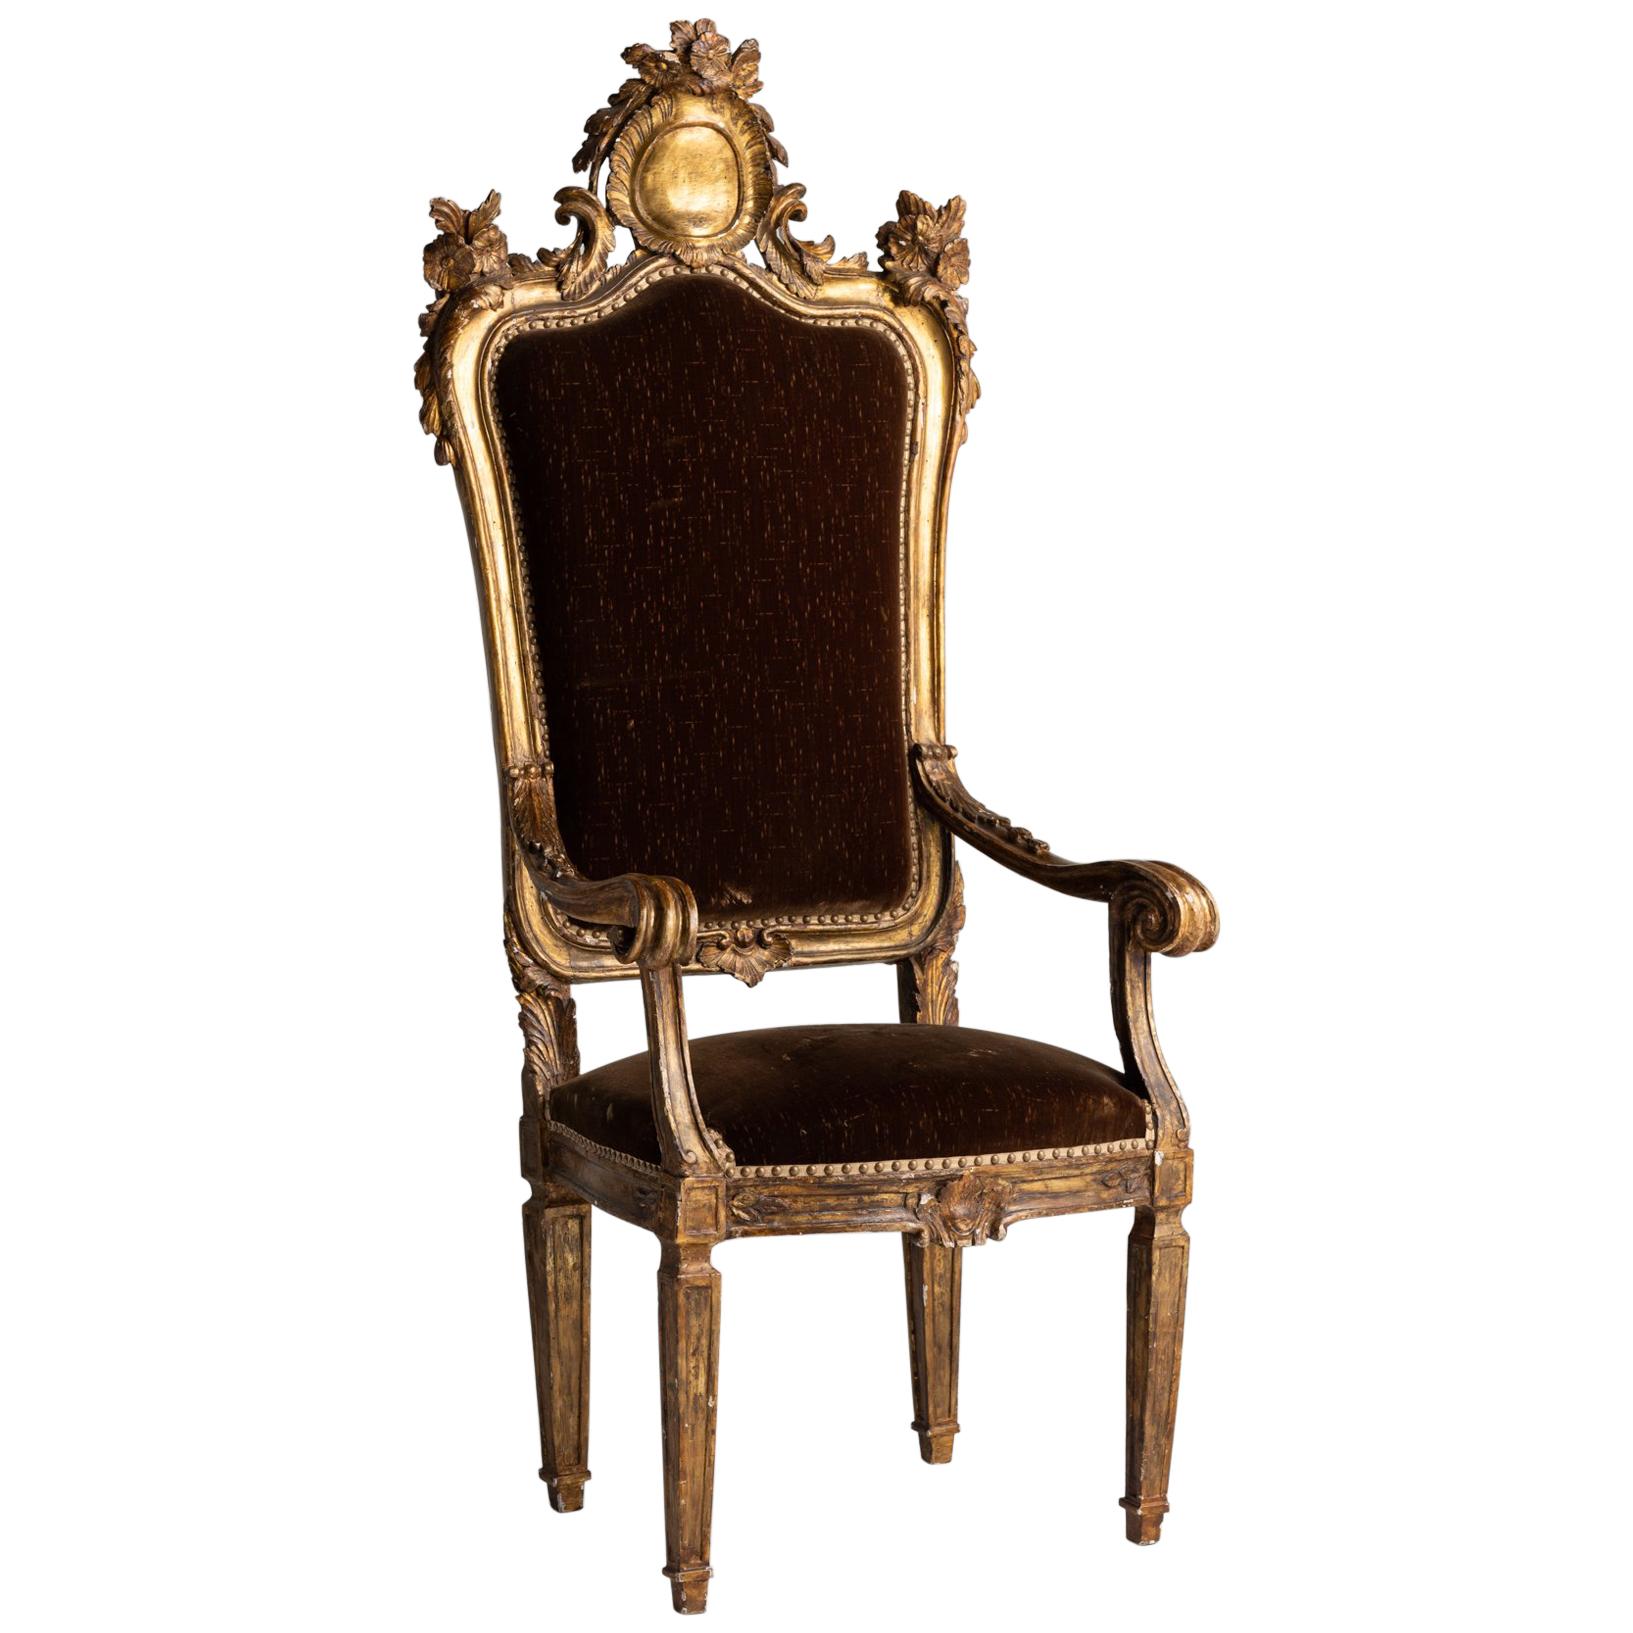 Gilded Throne Chair, Italy, 18th Century